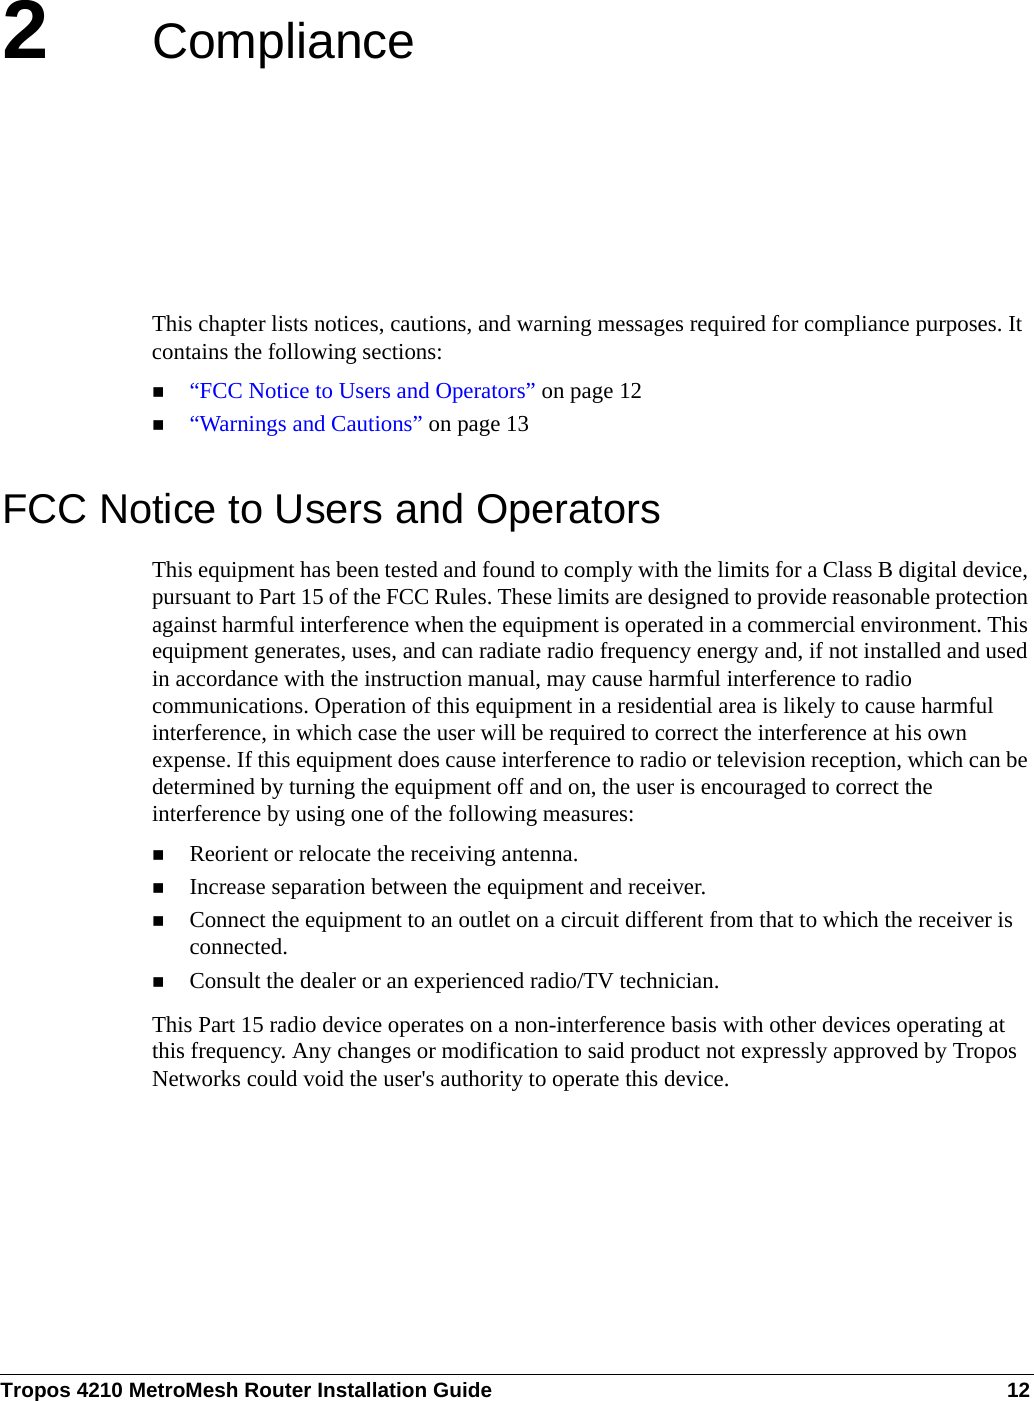 Tropos 4210 MetroMesh Router Installation Guide 122ComplianceThis chapter lists notices, cautions, and warning messages required for compliance purposes. It contains the following sections:“FCC Notice to Users and Operators” on page 12“Warnings and Cautions” on page 13FCC Notice to Users and OperatorsThis equipment has been tested and found to comply with the limits for a Class B digital device, pursuant to Part 15 of the FCC Rules. These limits are designed to provide reasonable protection against harmful interference when the equipment is operated in a commercial environment. This equipment generates, uses, and can radiate radio frequency energy and, if not installed and used in accordance with the instruction manual, may cause harmful interference to radio communications. Operation of this equipment in a residential area is likely to cause harmful interference, in which case the user will be required to correct the interference at his own expense. If this equipment does cause interference to radio or television reception, which can be determined by turning the equipment off and on, the user is encouraged to correct the interference by using one of the following measures:Reorient or relocate the receiving antenna. Increase separation between the equipment and receiver. Connect the equipment to an outlet on a circuit different from that to which the receiver is connected. Consult the dealer or an experienced radio/TV technician.This Part 15 radio device operates on a non-interference basis with other devices operating at this frequency. Any changes or modification to said product not expressly approved by Tropos Networks could void the user&apos;s authority to operate this device.